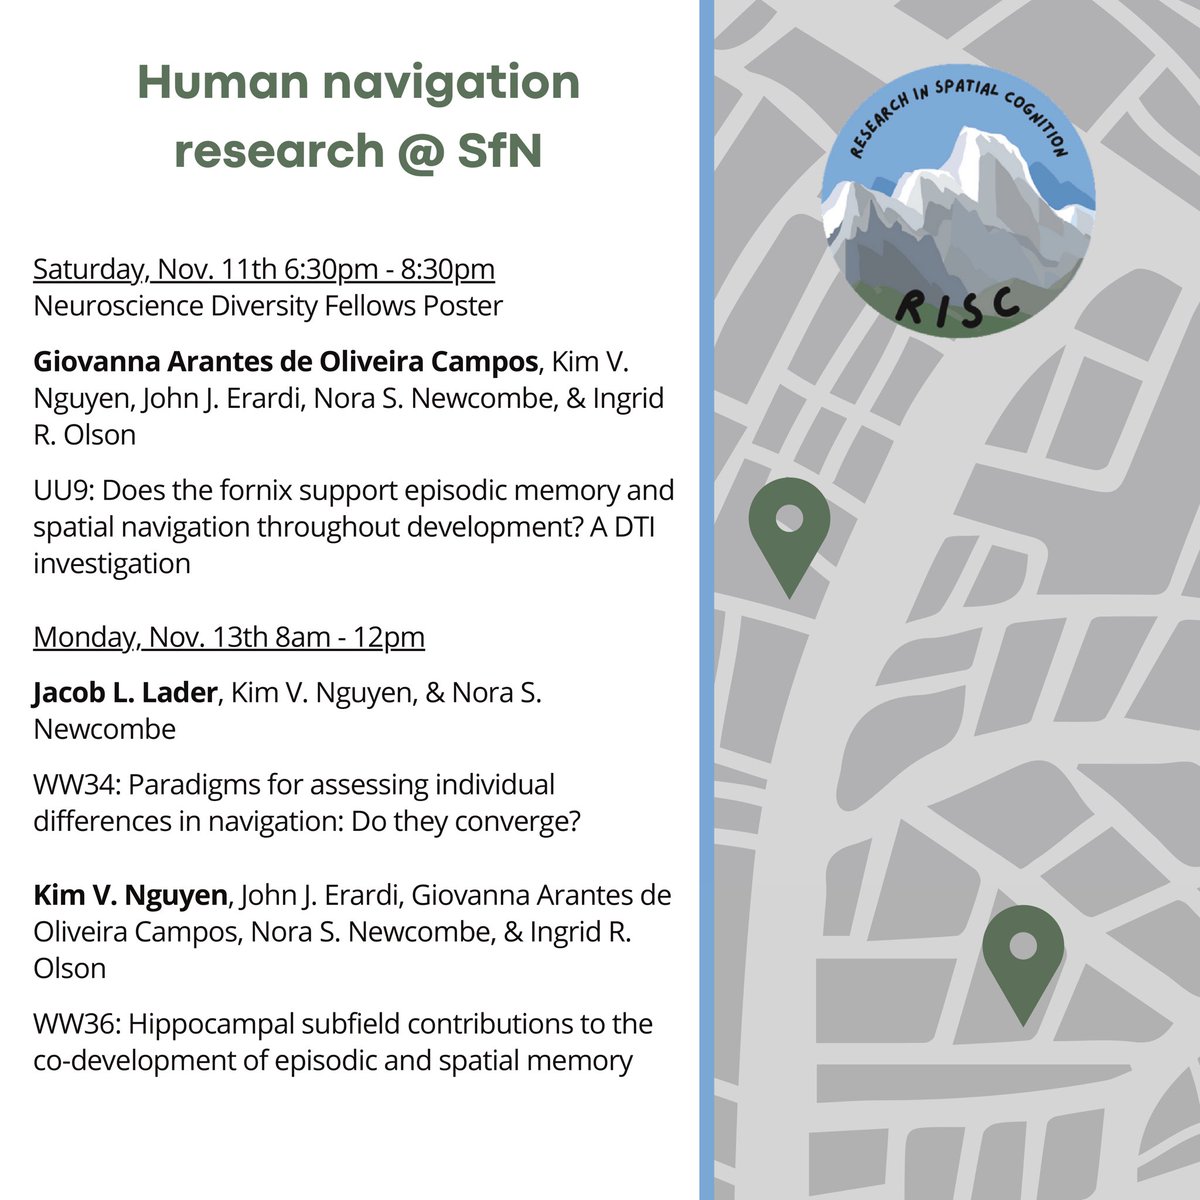 Interested in human (especially little humans) navigation research? Come by our lab’s posters at #Neuroscience2023 on Saturday and Monday! @SfNtweets @giovanna_aoc @NoraNewcombe @ingrids_brain